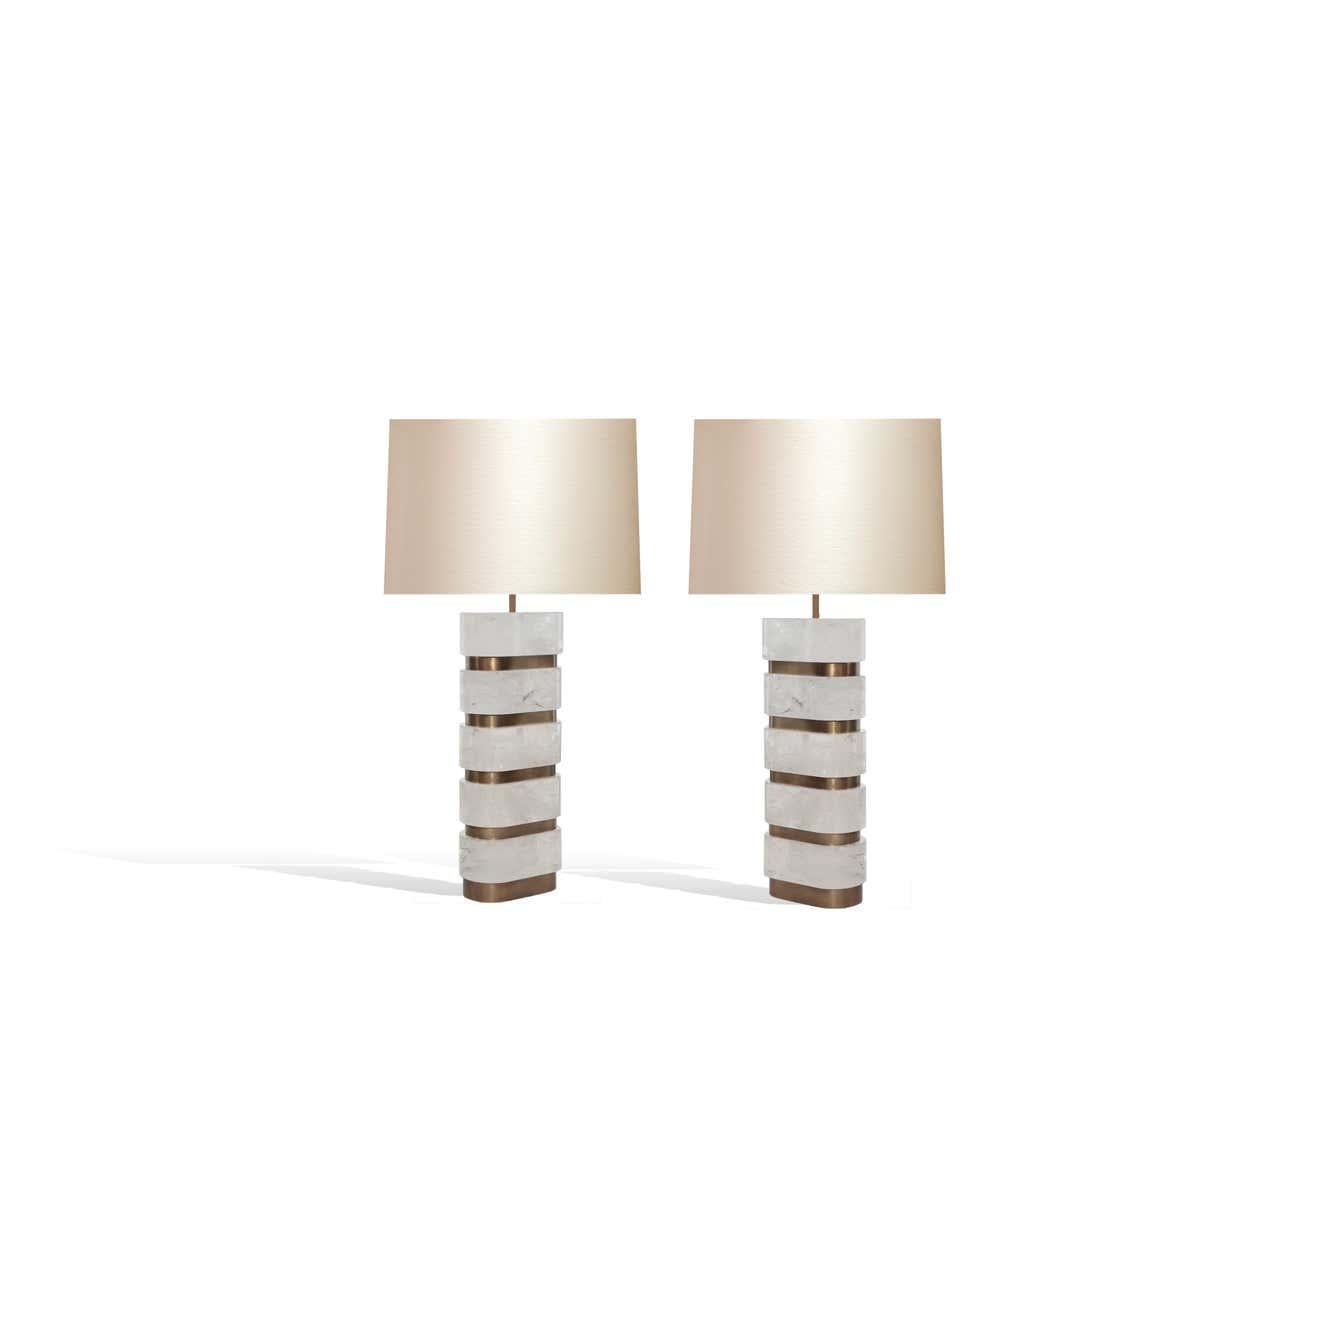 Pair of arc-shaped block form rock crystal quartz lamps with antique brass insert decoration. Created by Phoenix Gallery, NYC.
Each lamp installed with two sockets, 75 watts each socket, total of 150-watt maximum.
(Lampshade not included).